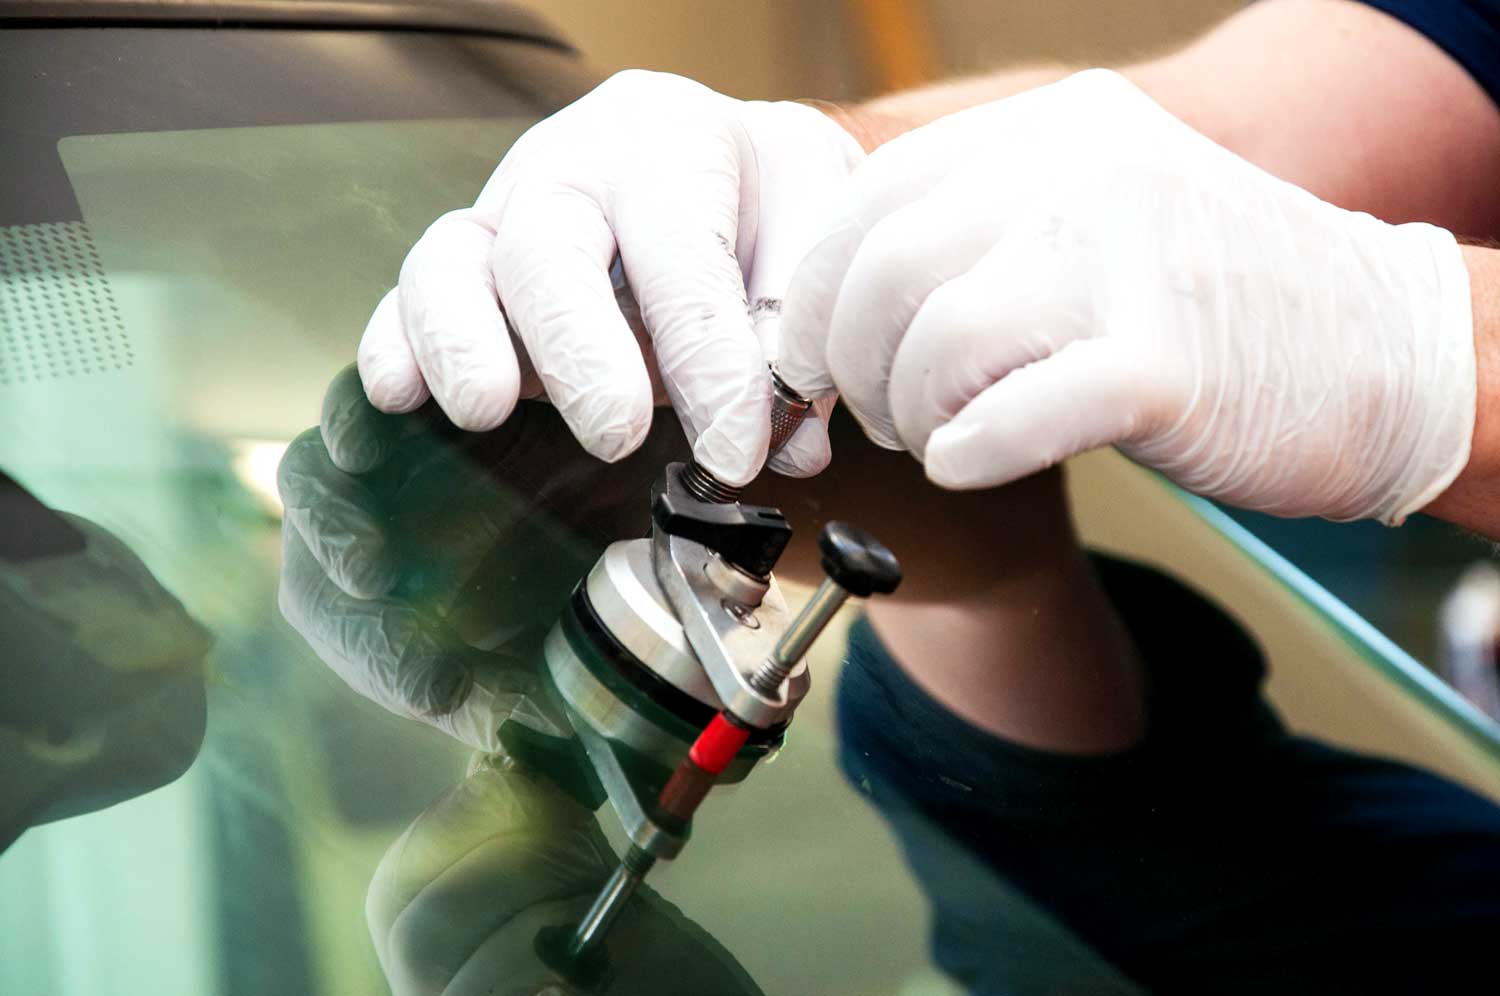 A gloved technician repairing rock chips on the windshield using a glass chip repair tool